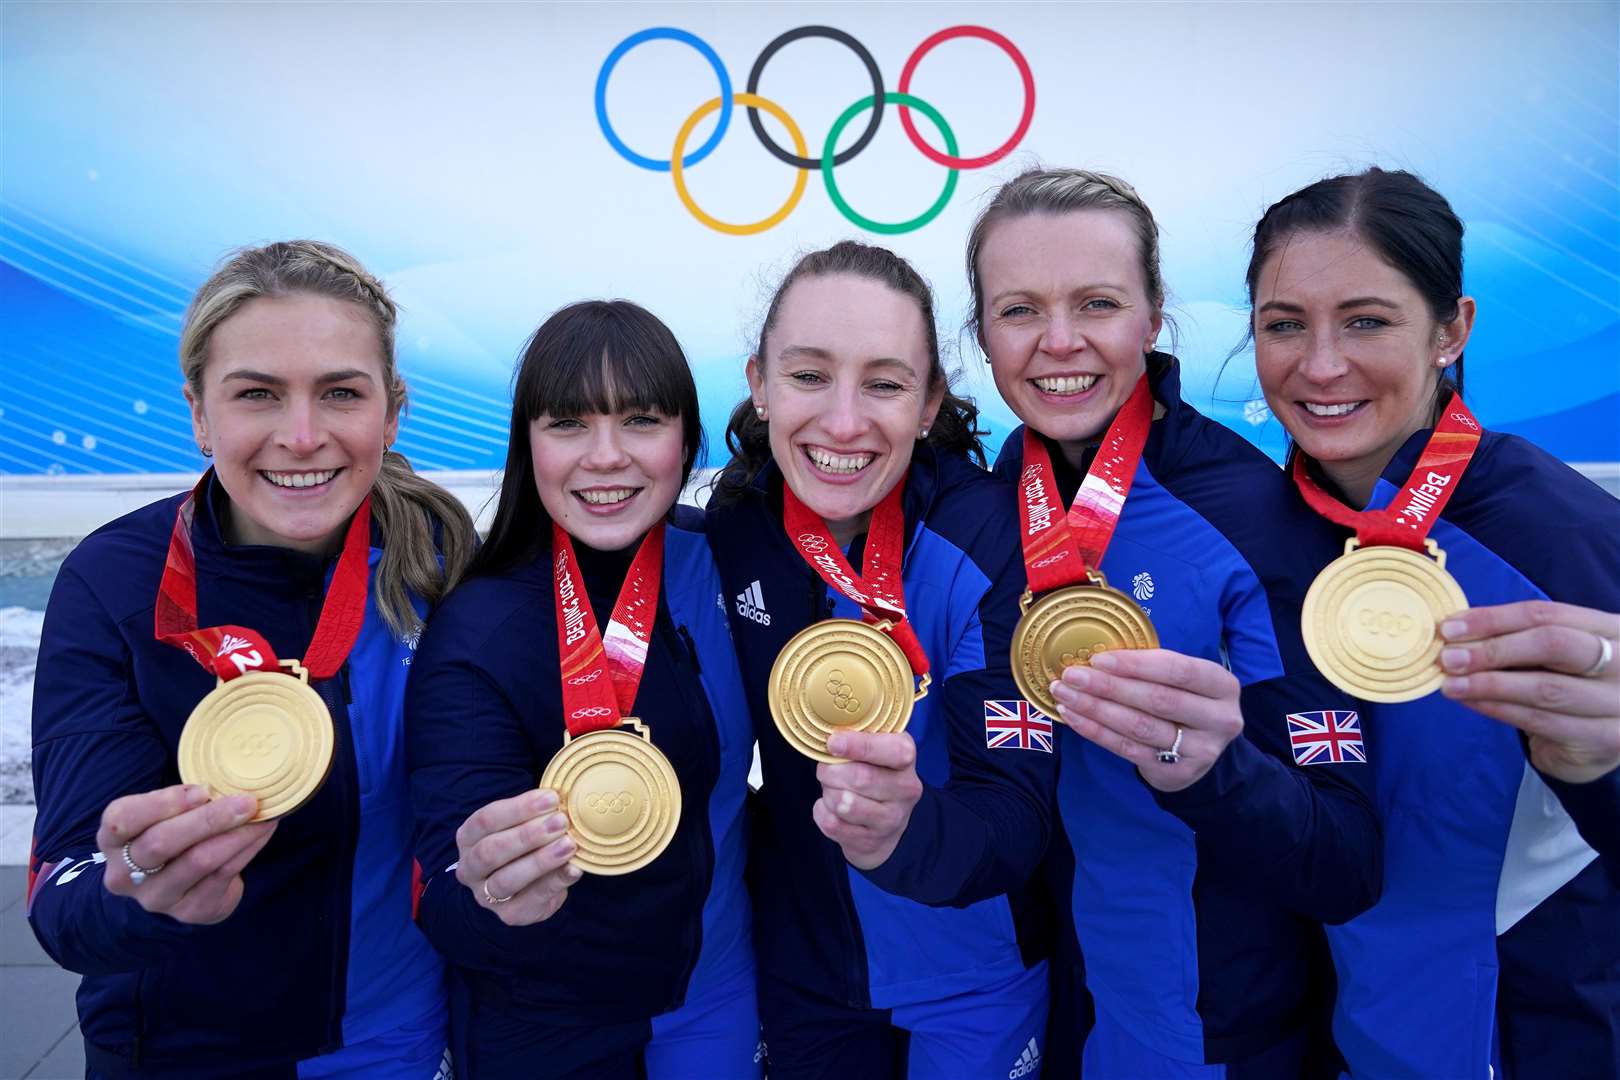 The members of the British Olympic Curling team have all been honoured after winning gold in Beijing (Andrew Milligan/PA)